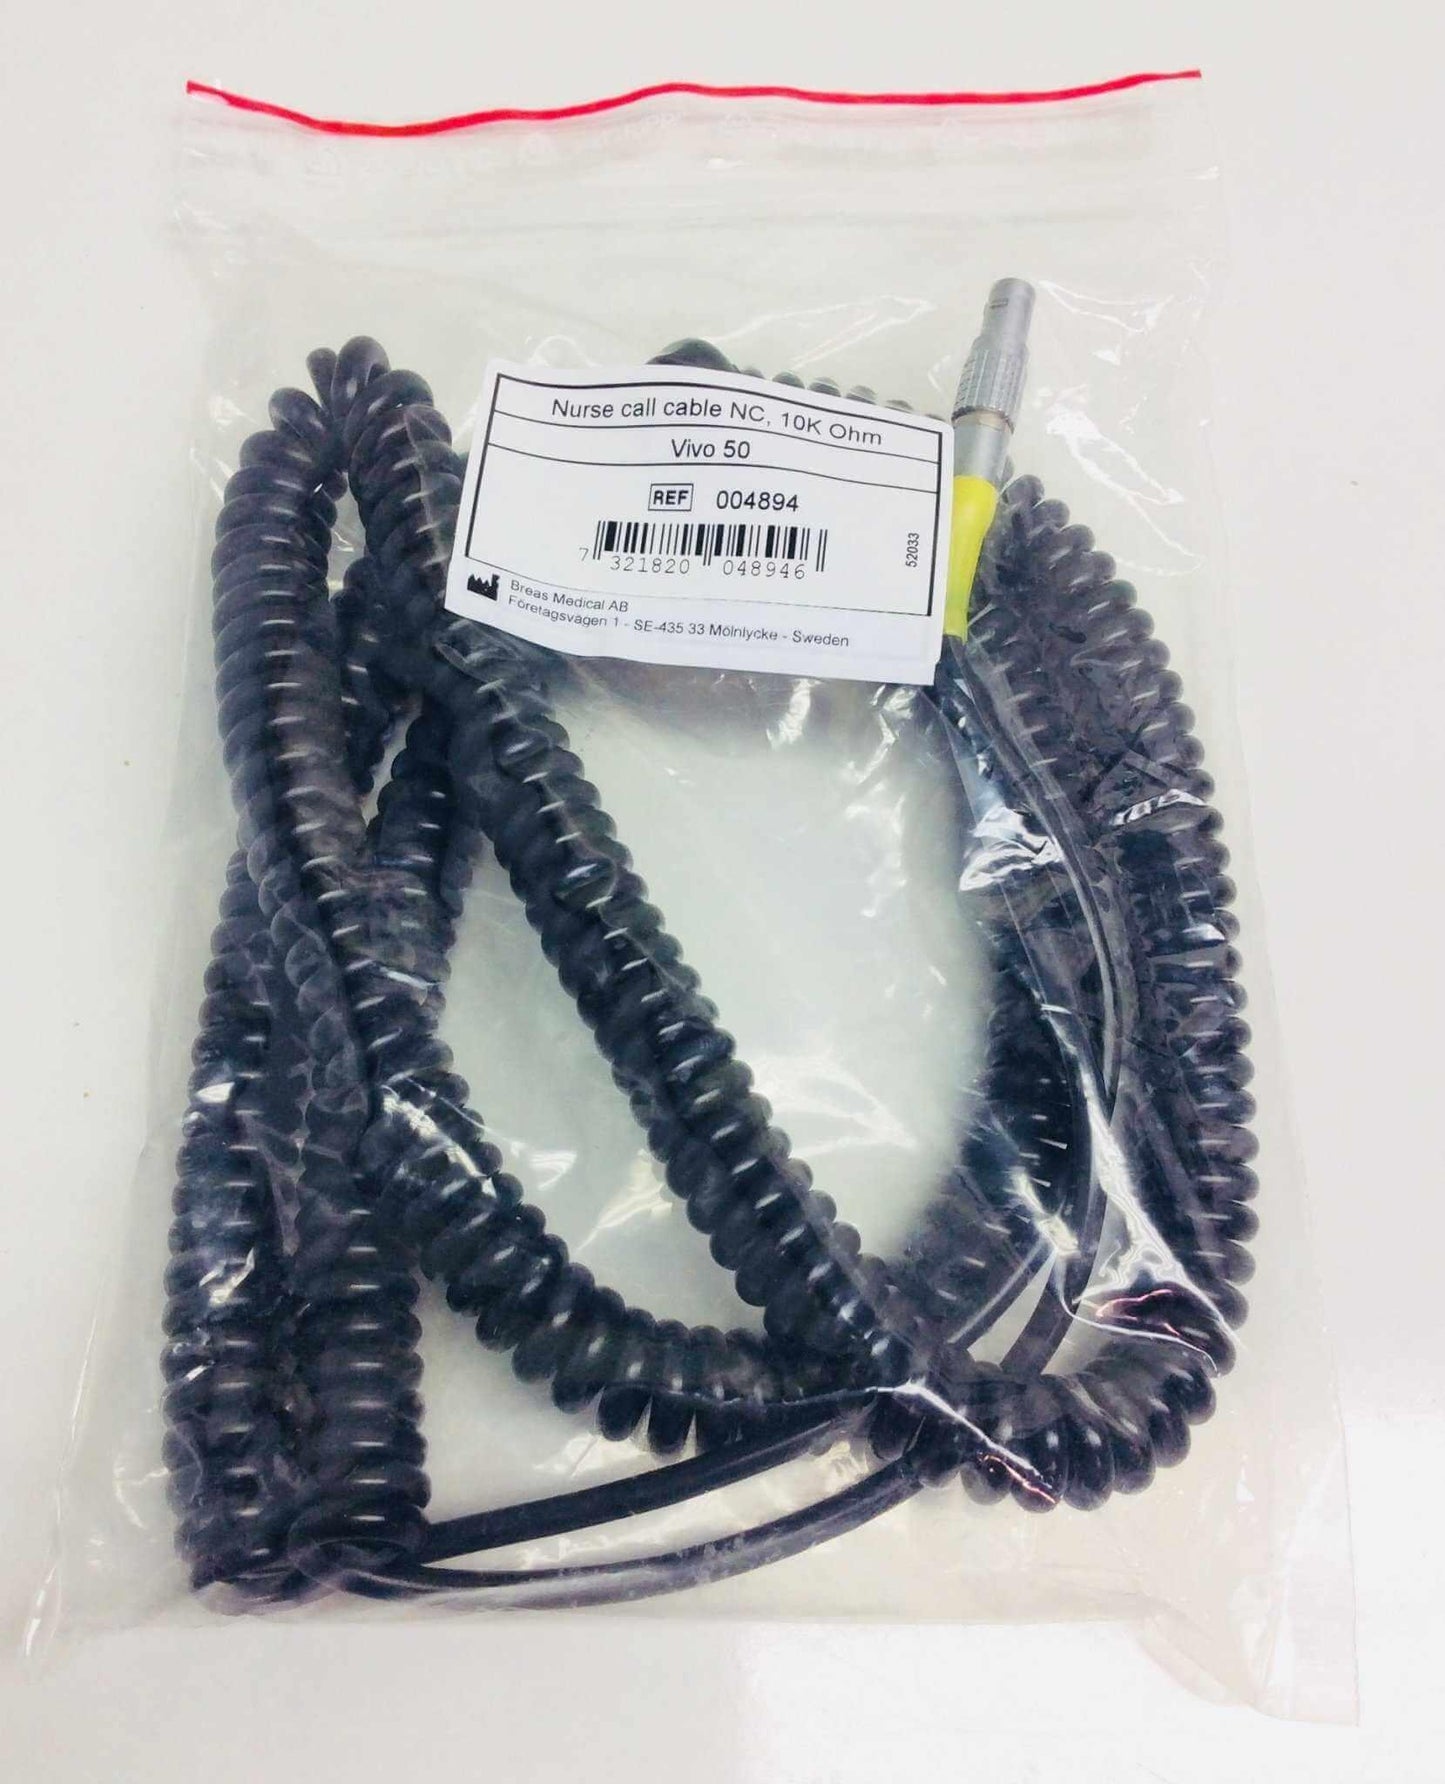 NEW Breas HDM Nurse Call Cable NC 10K OHM 004894 Warranty FREE Shipping - MBR Medicals